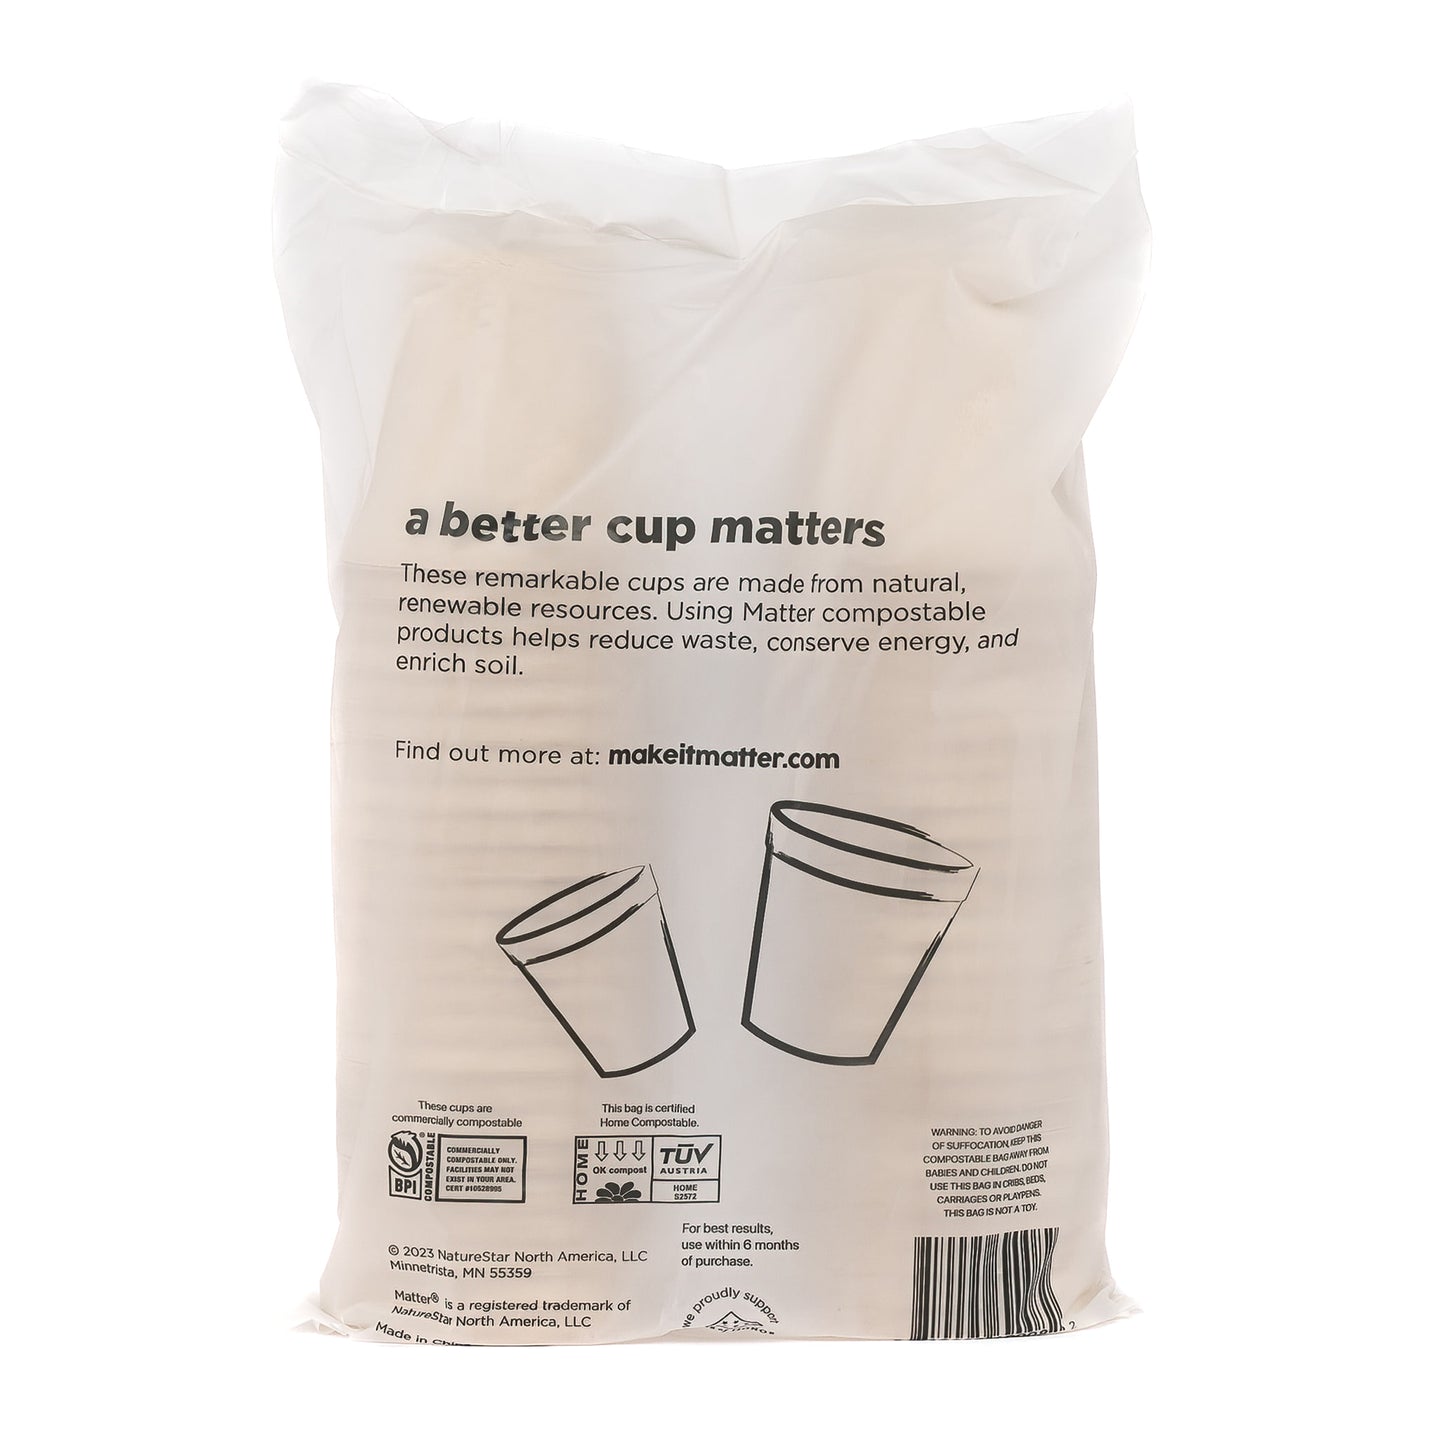 Matter Compostable 3oz Cups - 4 Pack